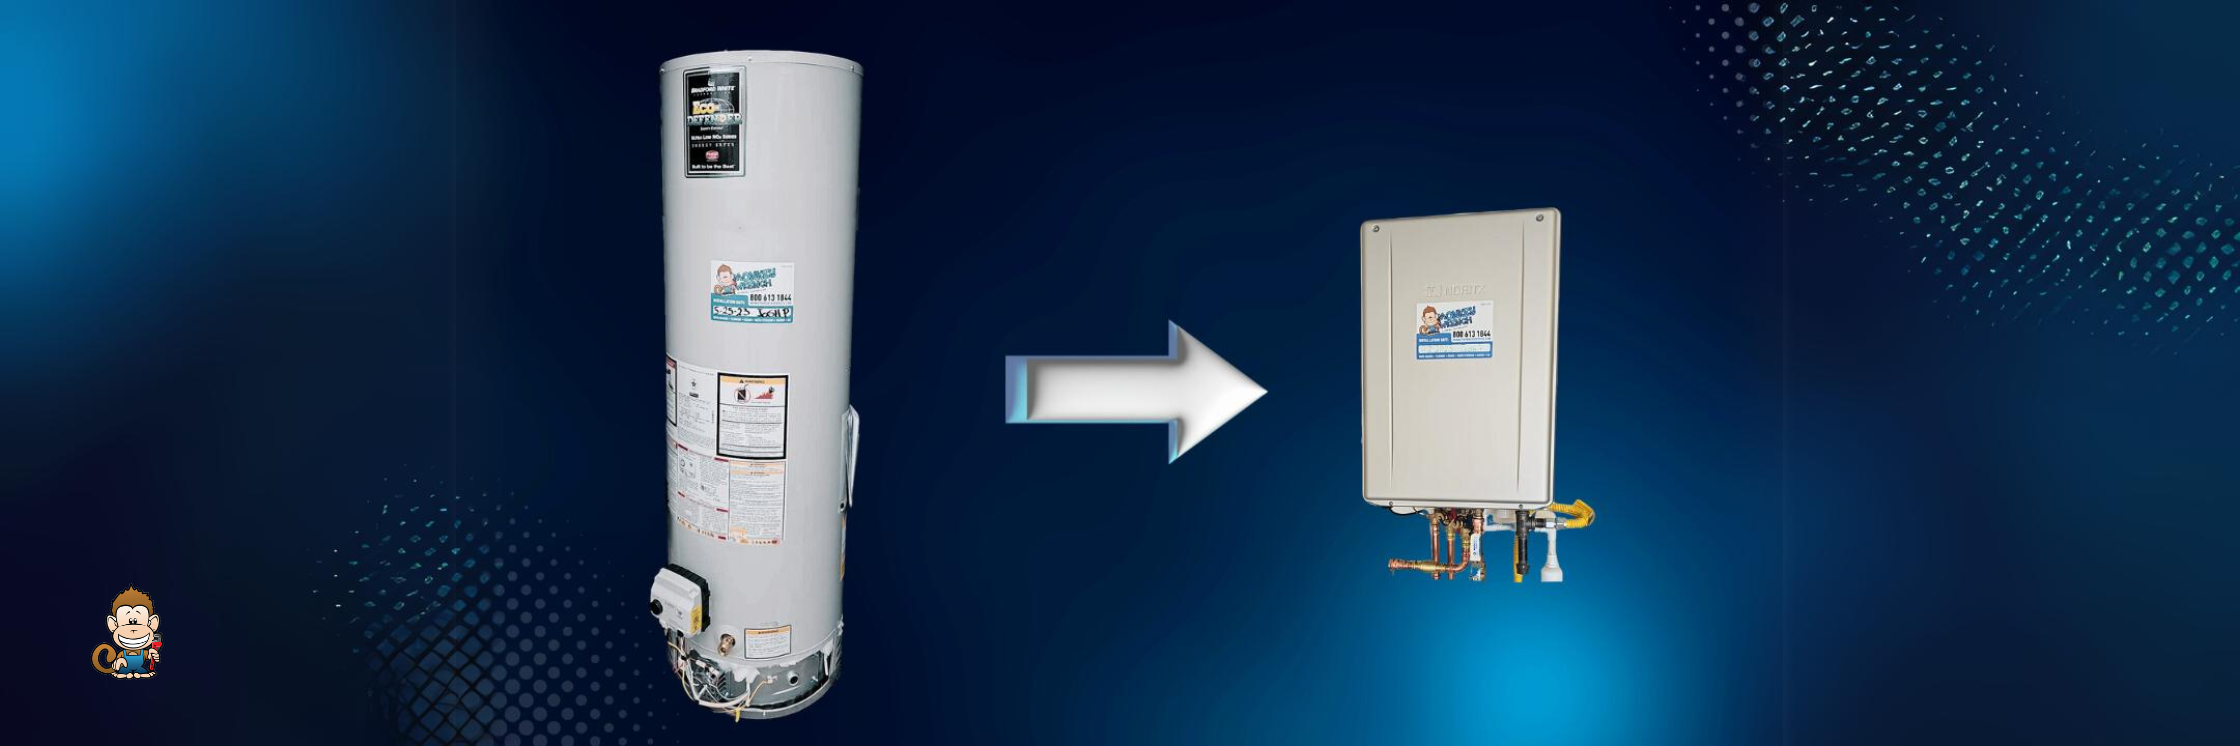 Pros and Cons of Swapping from Tank to Tankless Water Heater (Video)